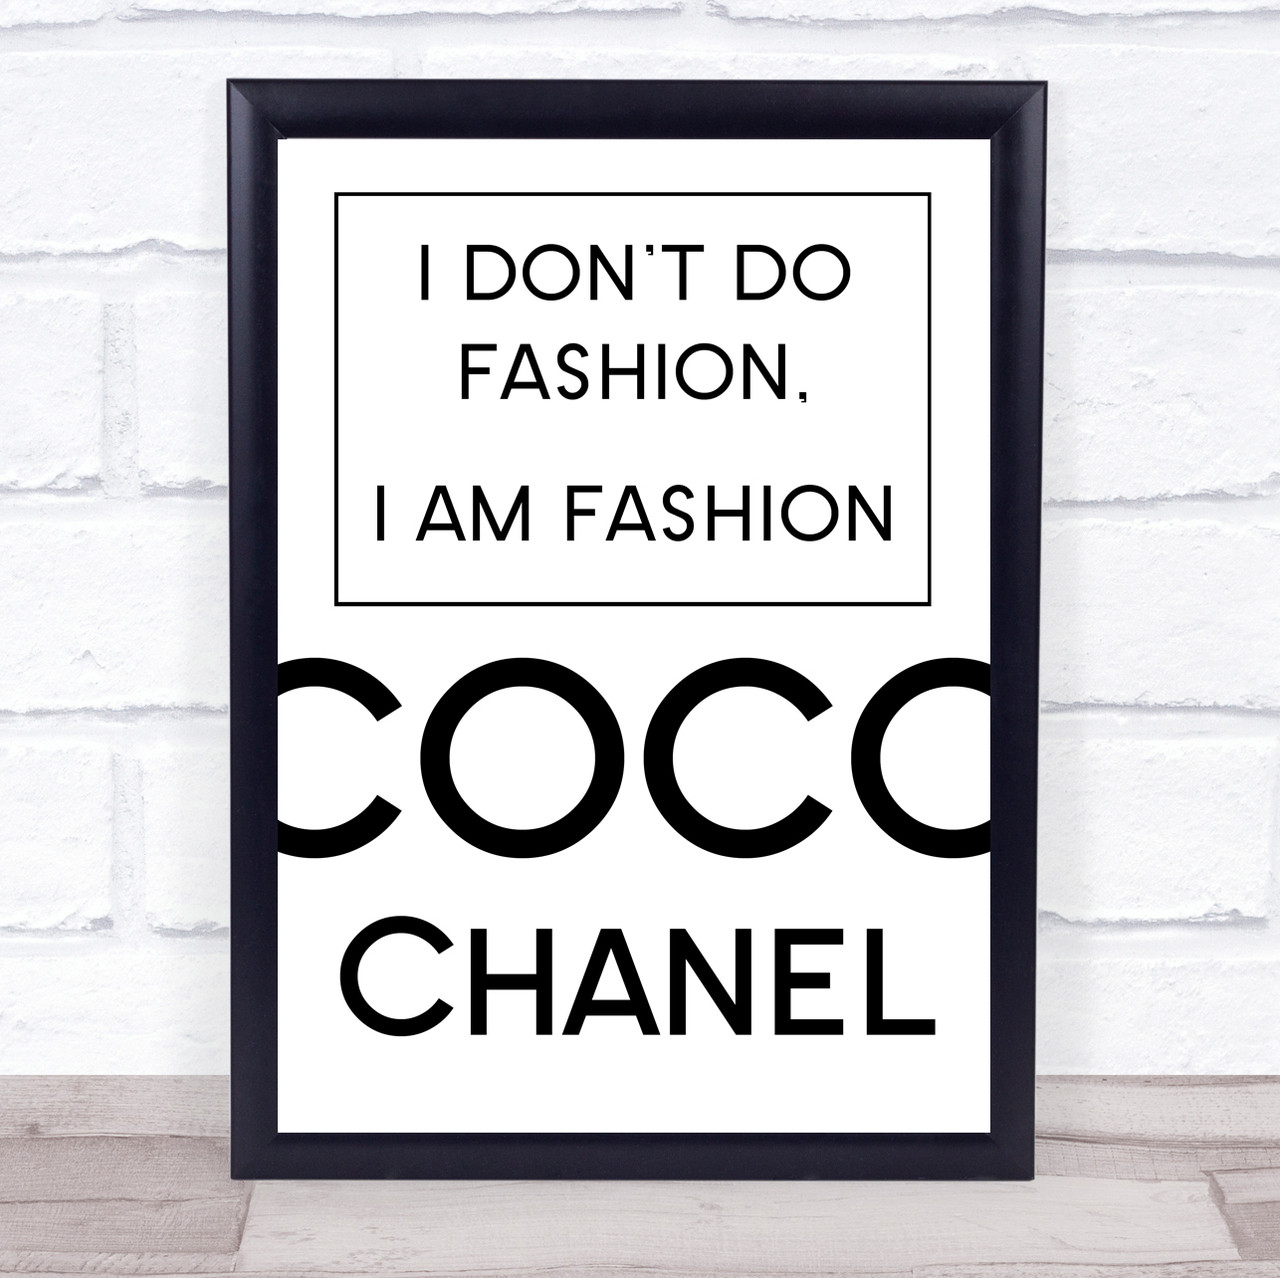 Buy I Dont Do Fashion I Am Fashion Coco Chanel Quote  A1 A2 A3 or A4  art prints on Art Wow designed by Toni Scott